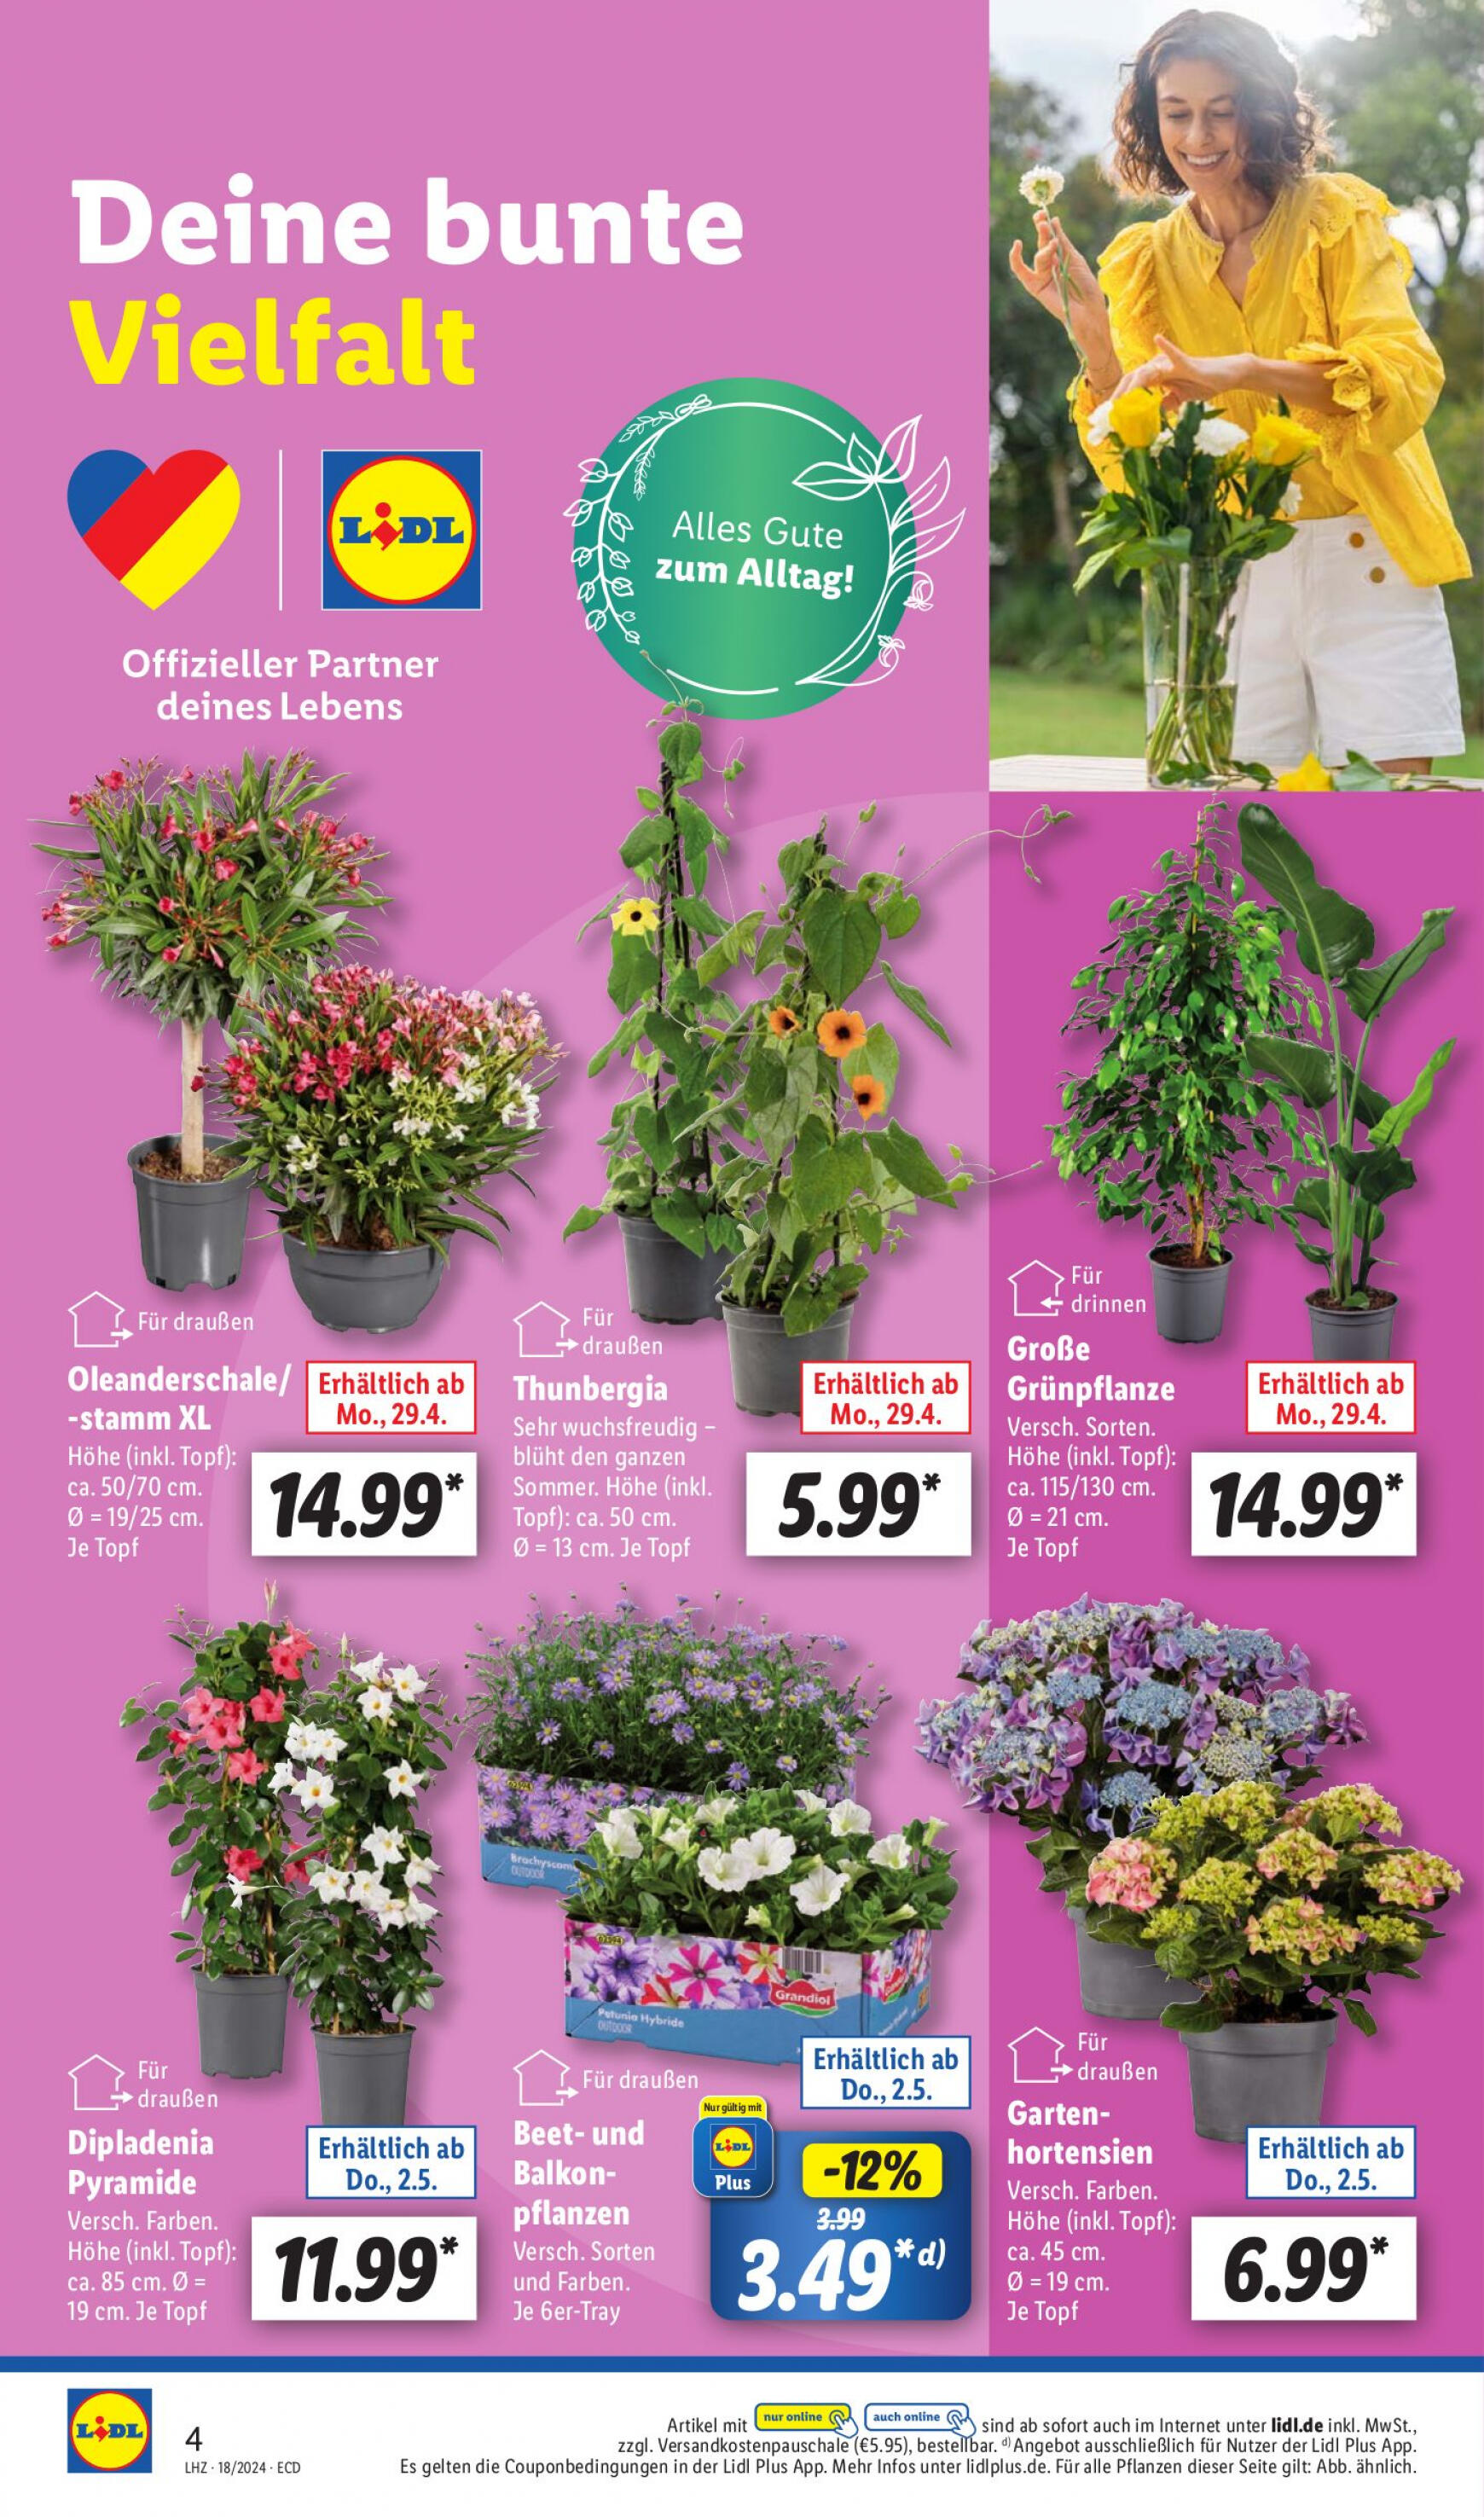 lidl - Flyer Lidl aktuell 29.04. - 04.05. - page: 4